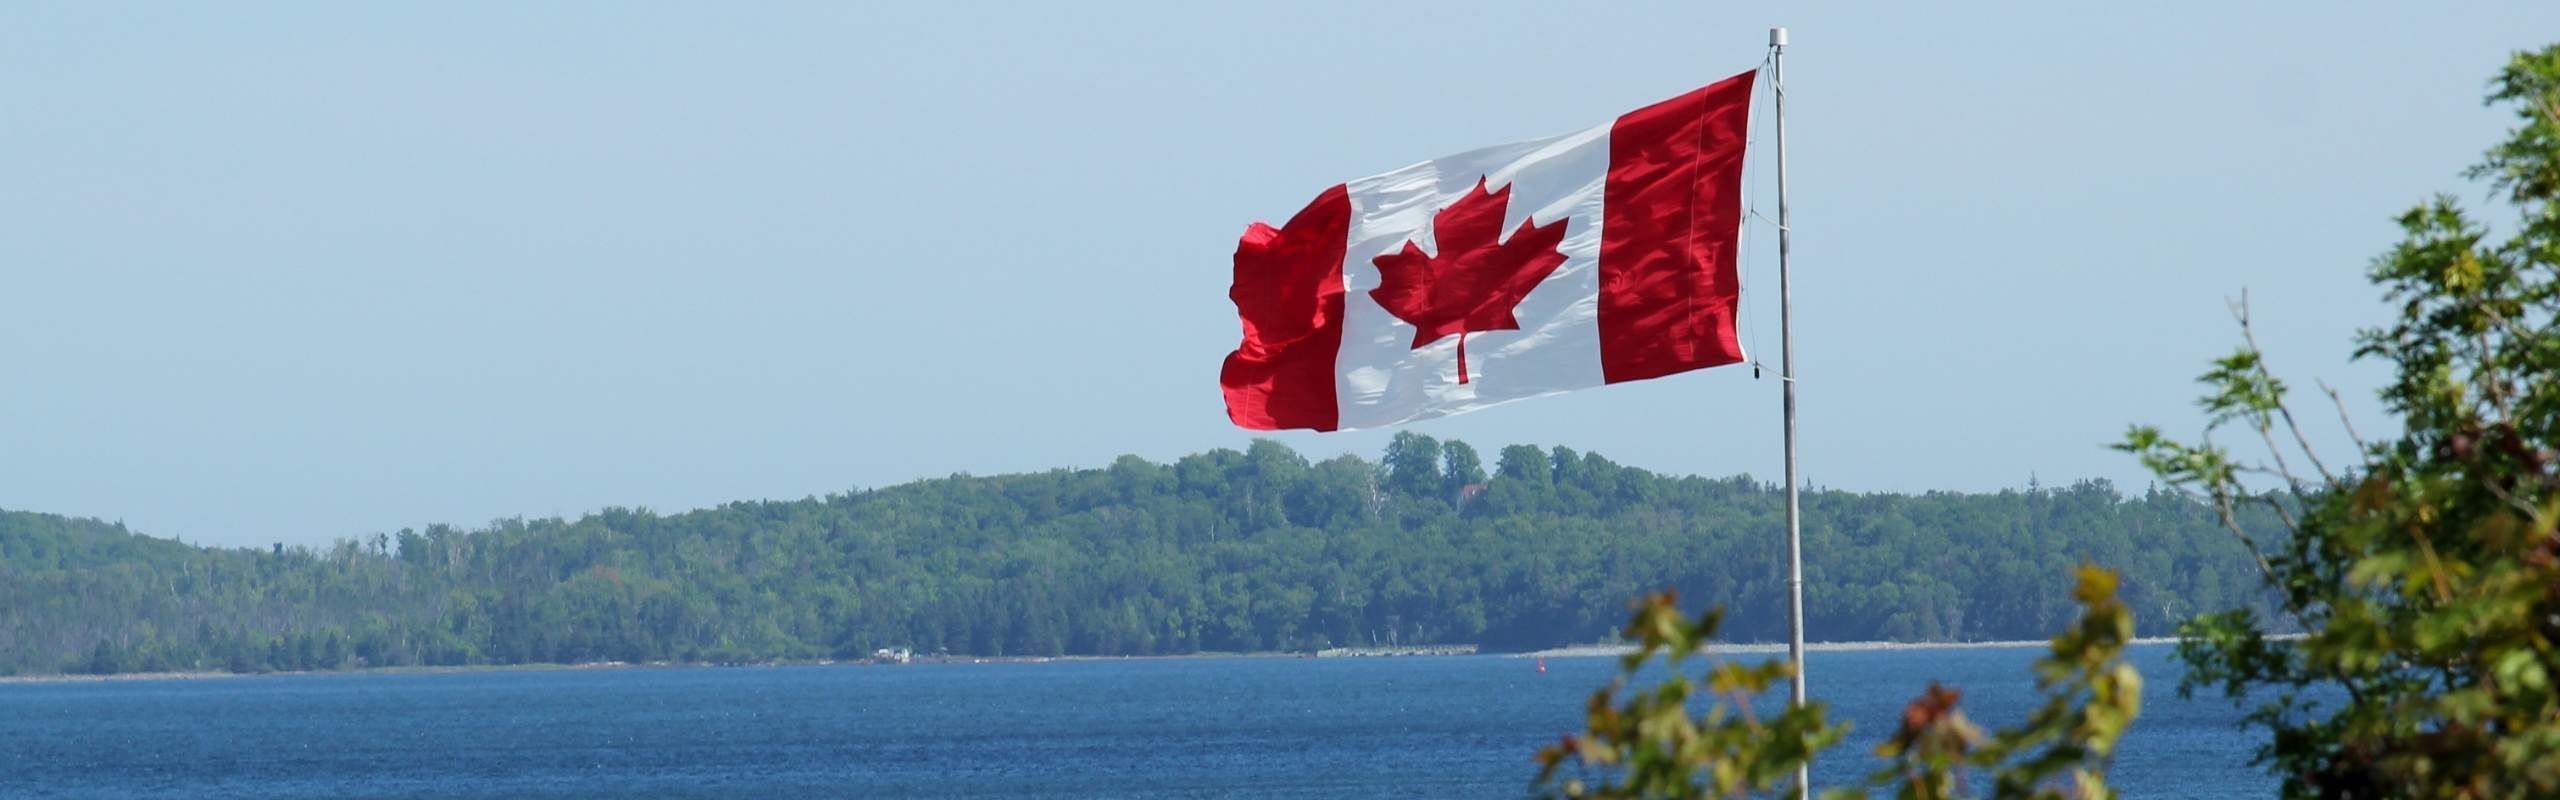 Canada flag over scenic background with lake and mountains